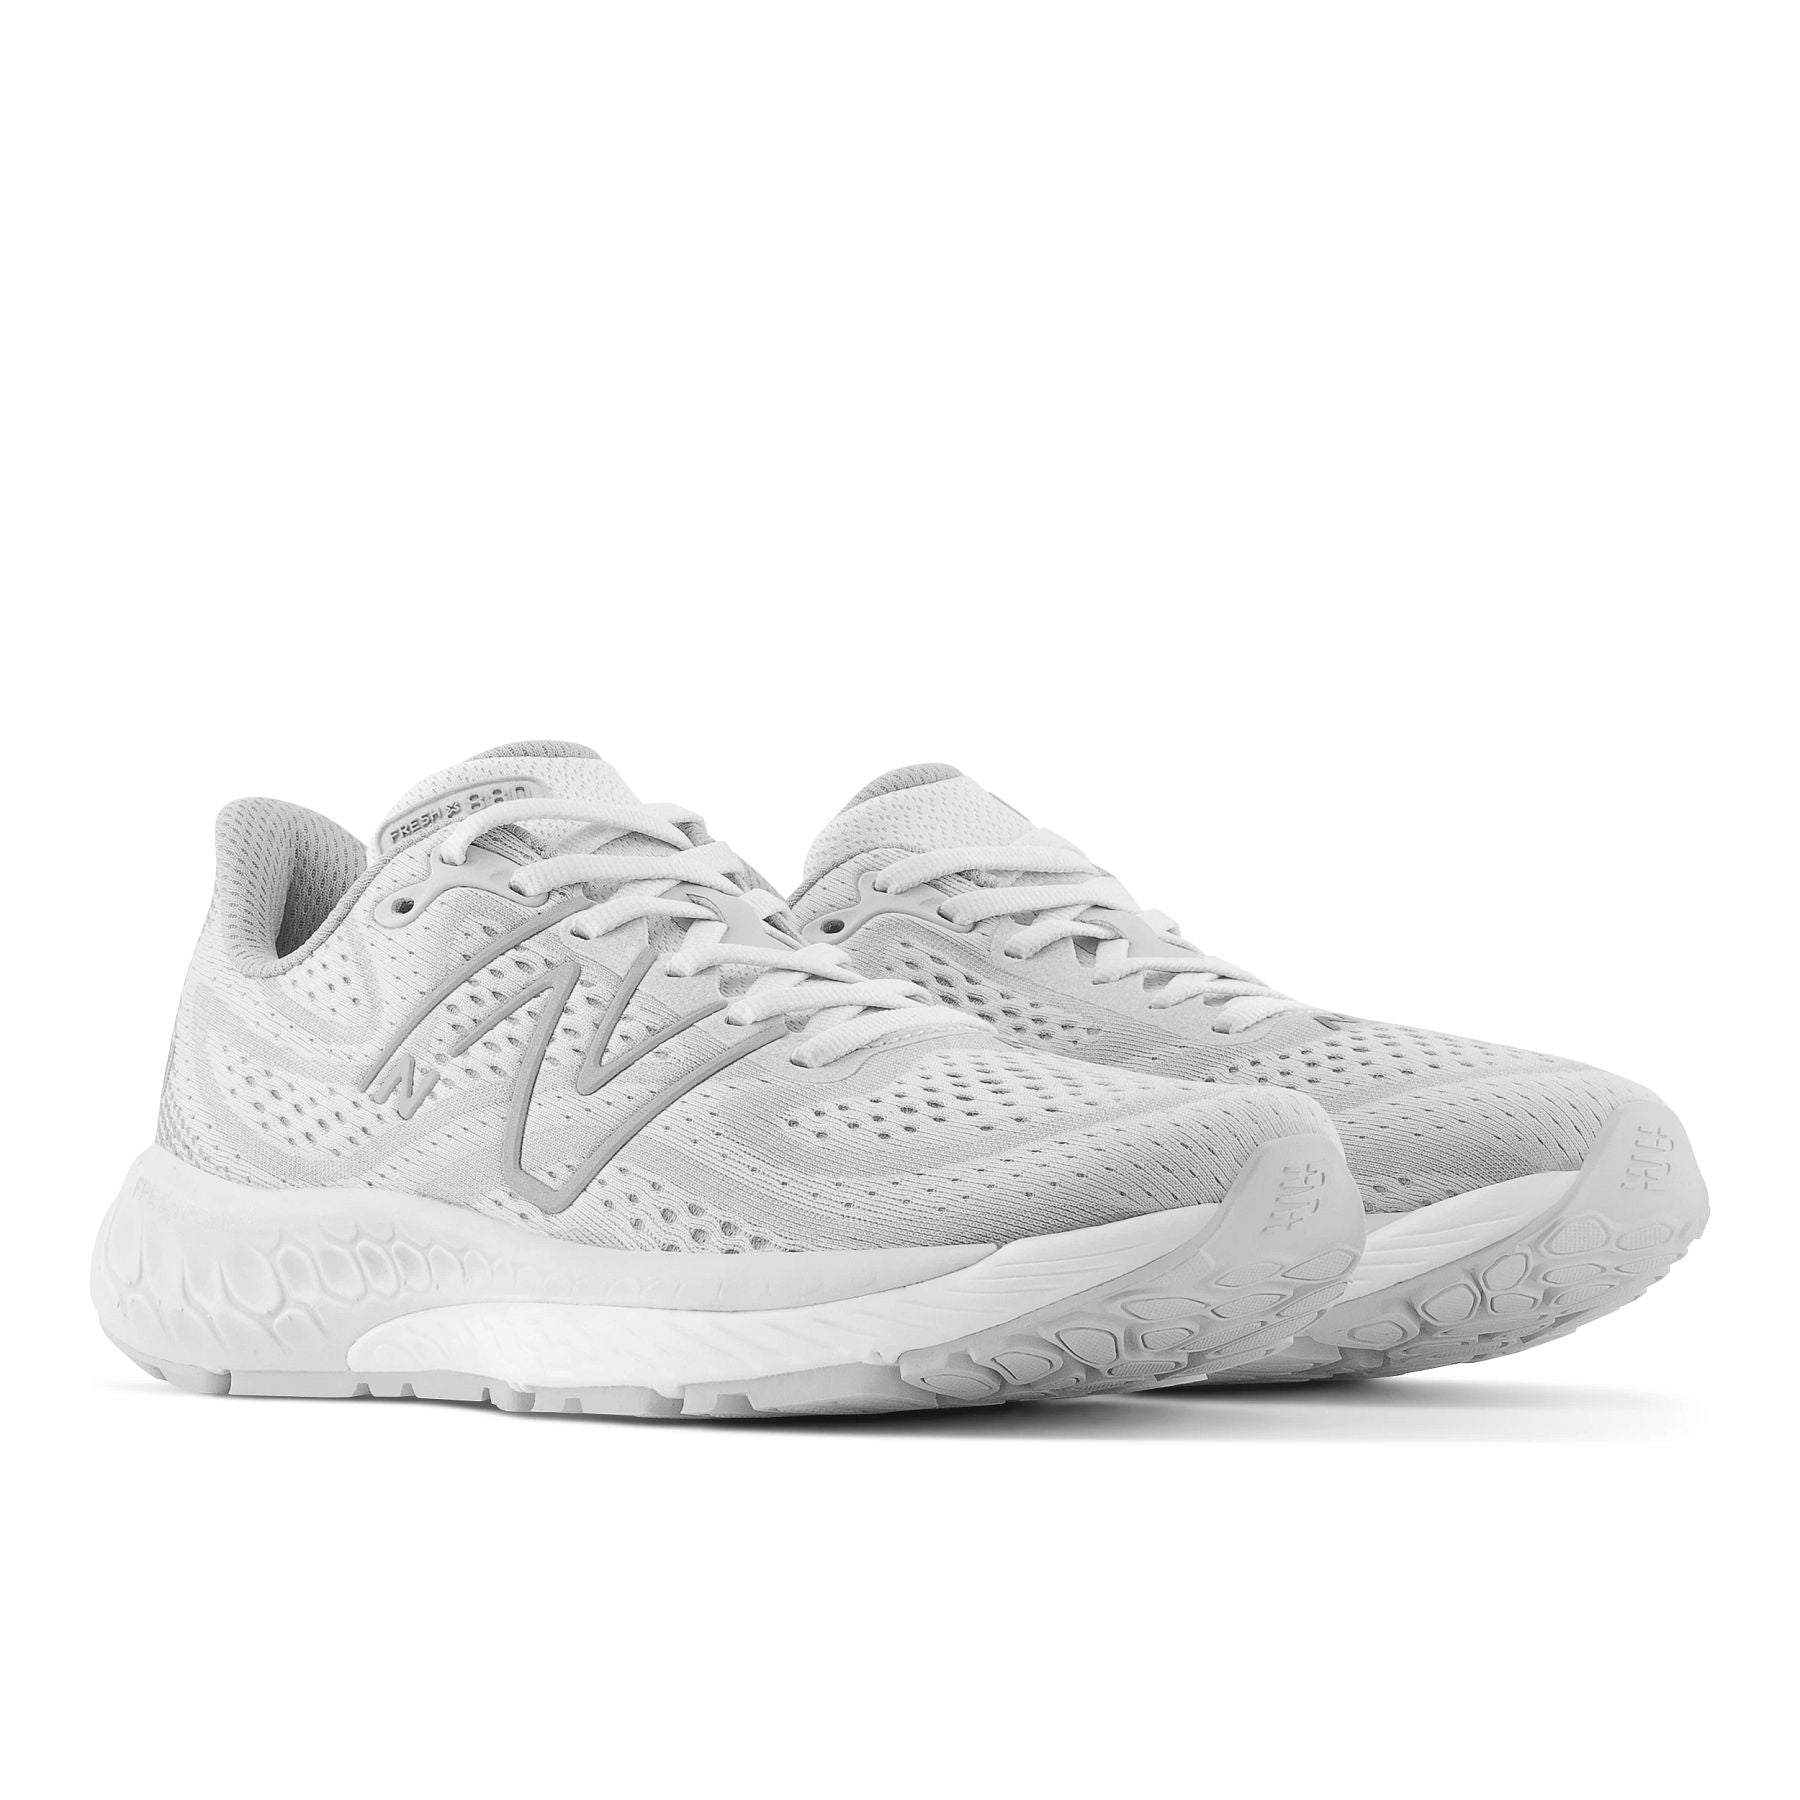 Front angle view of the Women's 880 V13 by New Balance in the color White/White